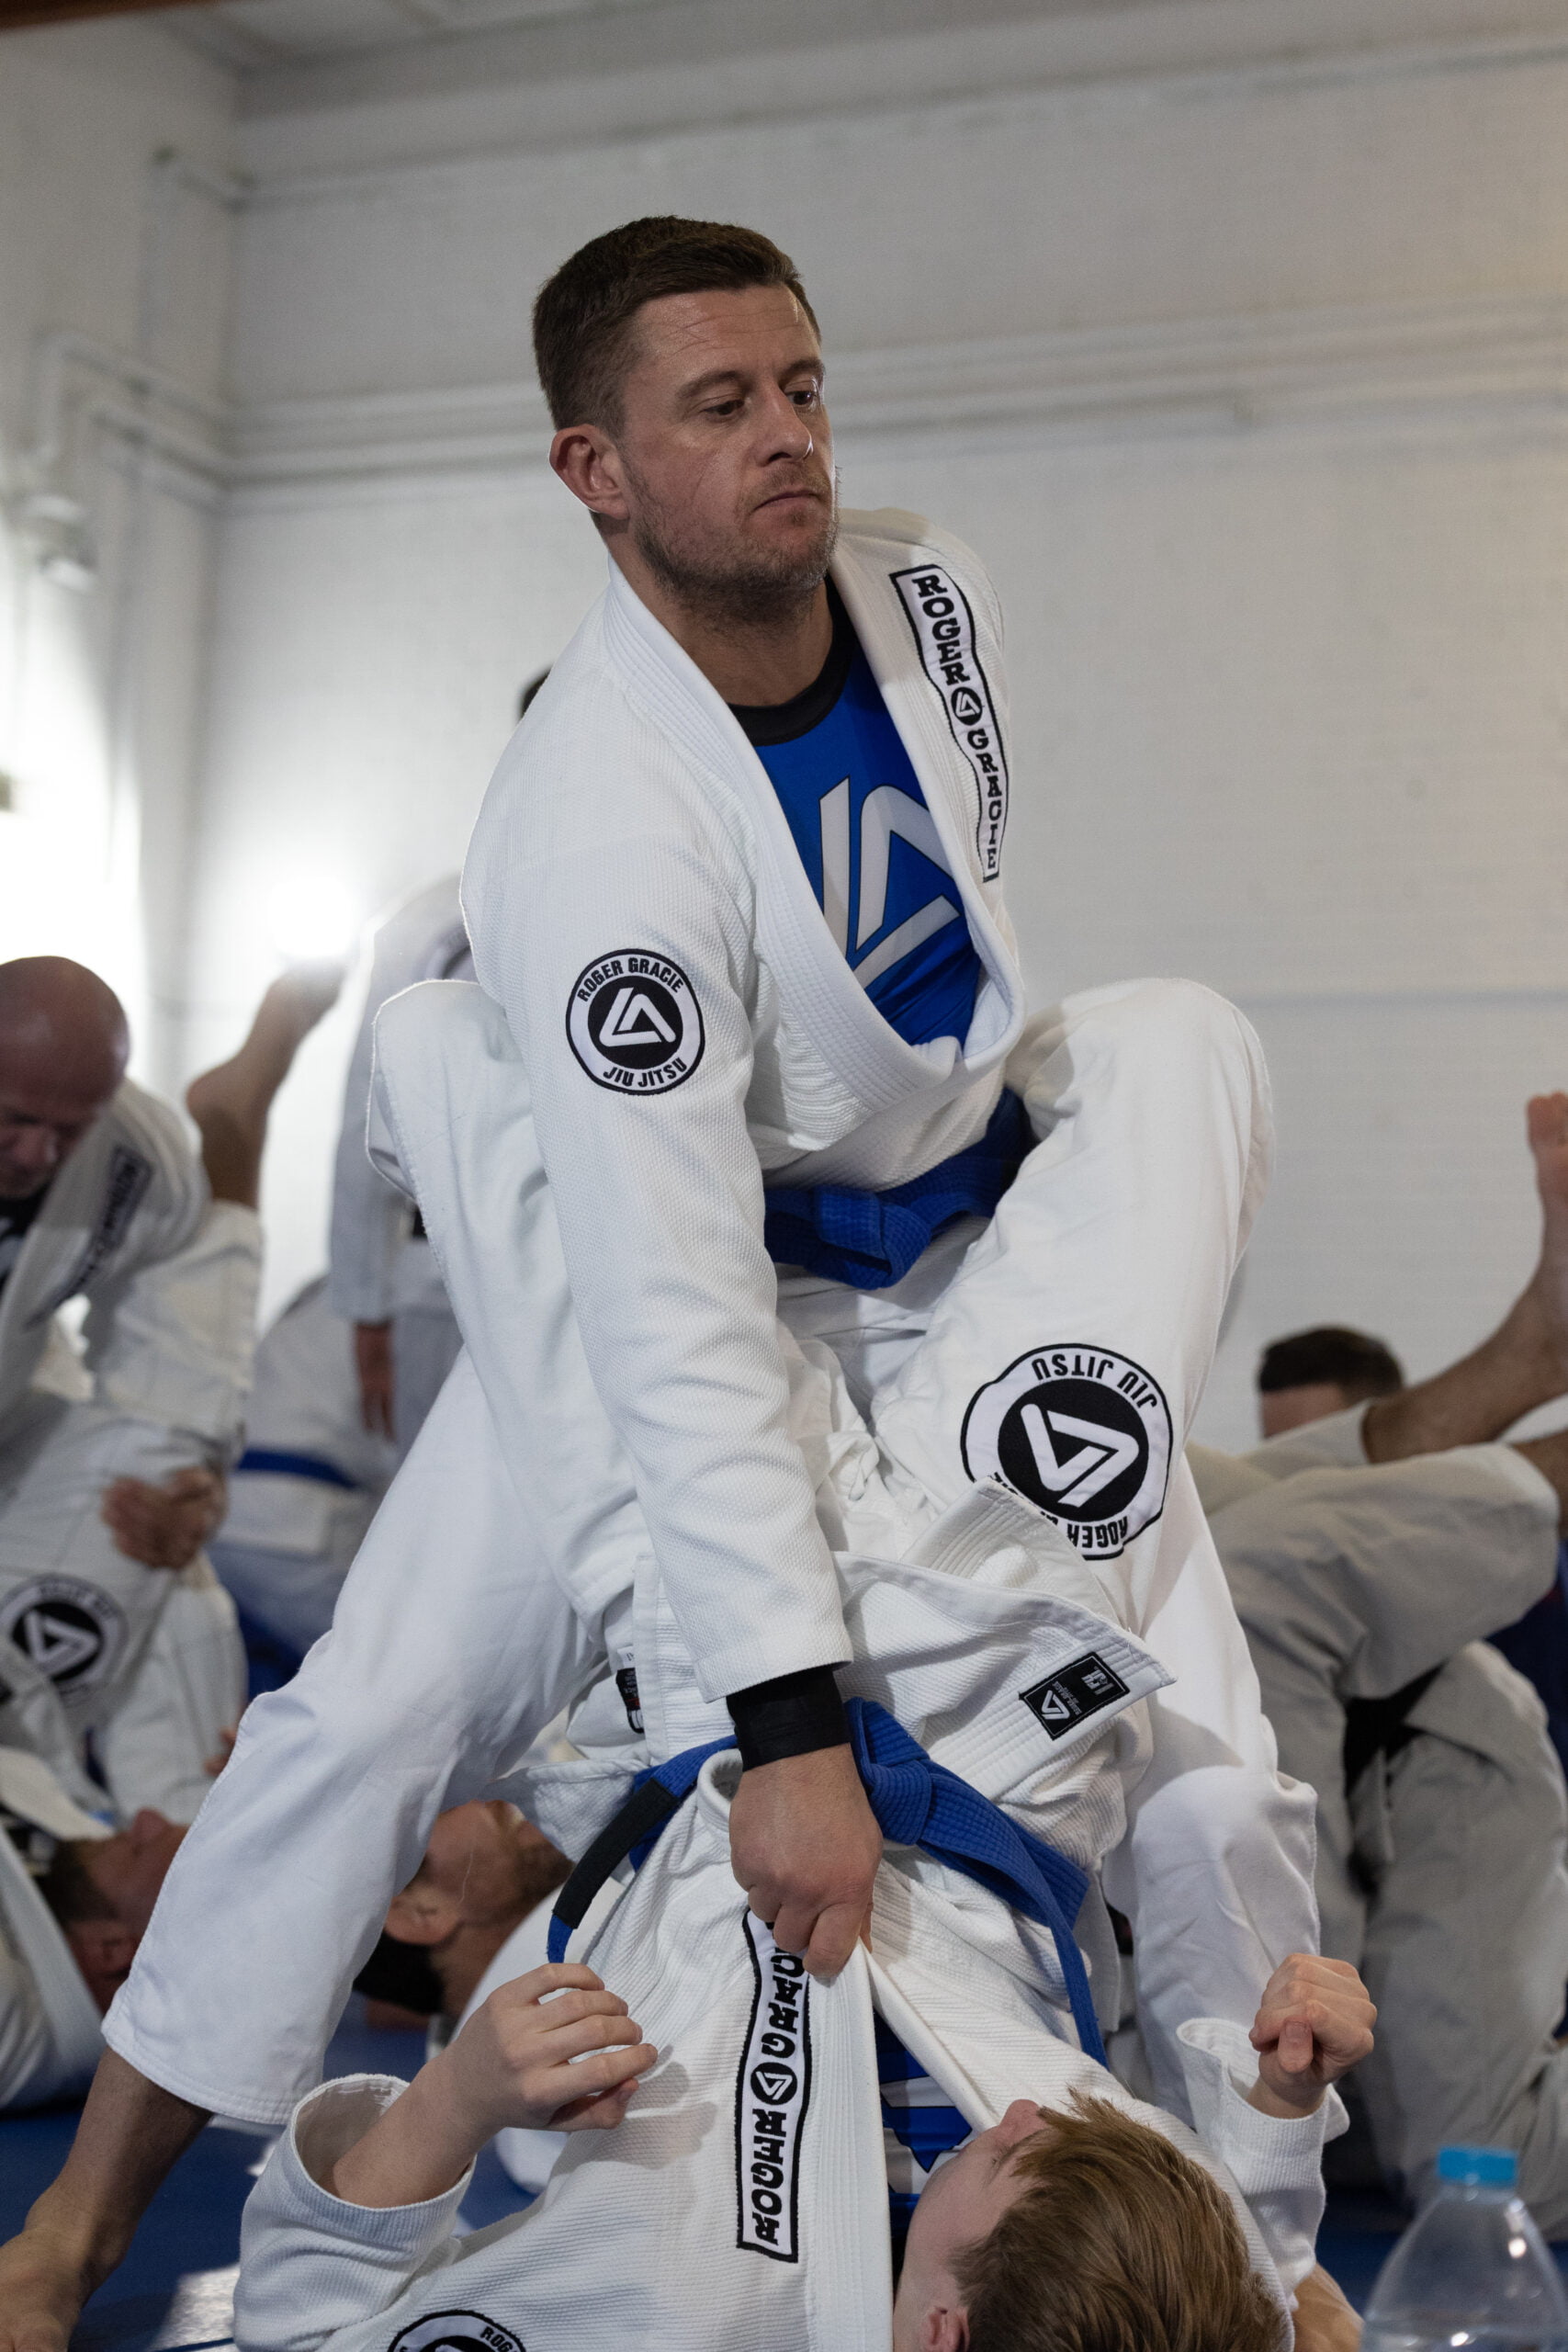 Roger Gracie Bristol blue belt standing up ready to break the closed guard open.